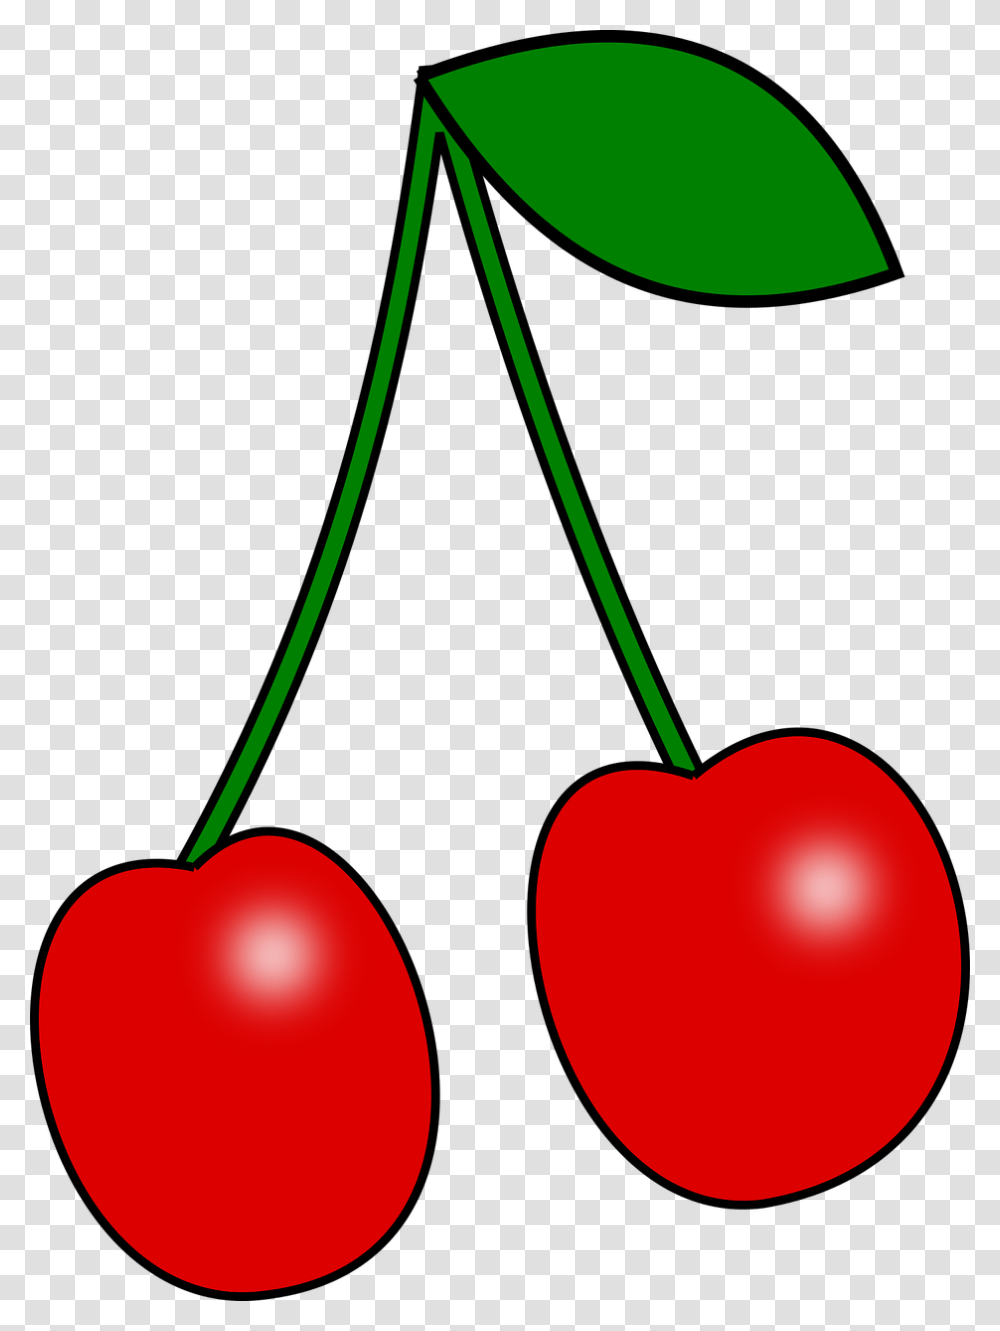 Cherry Fruit Health Free Photo Clip Art Red Cherry, Plant, Food, Lamp Transparent Png